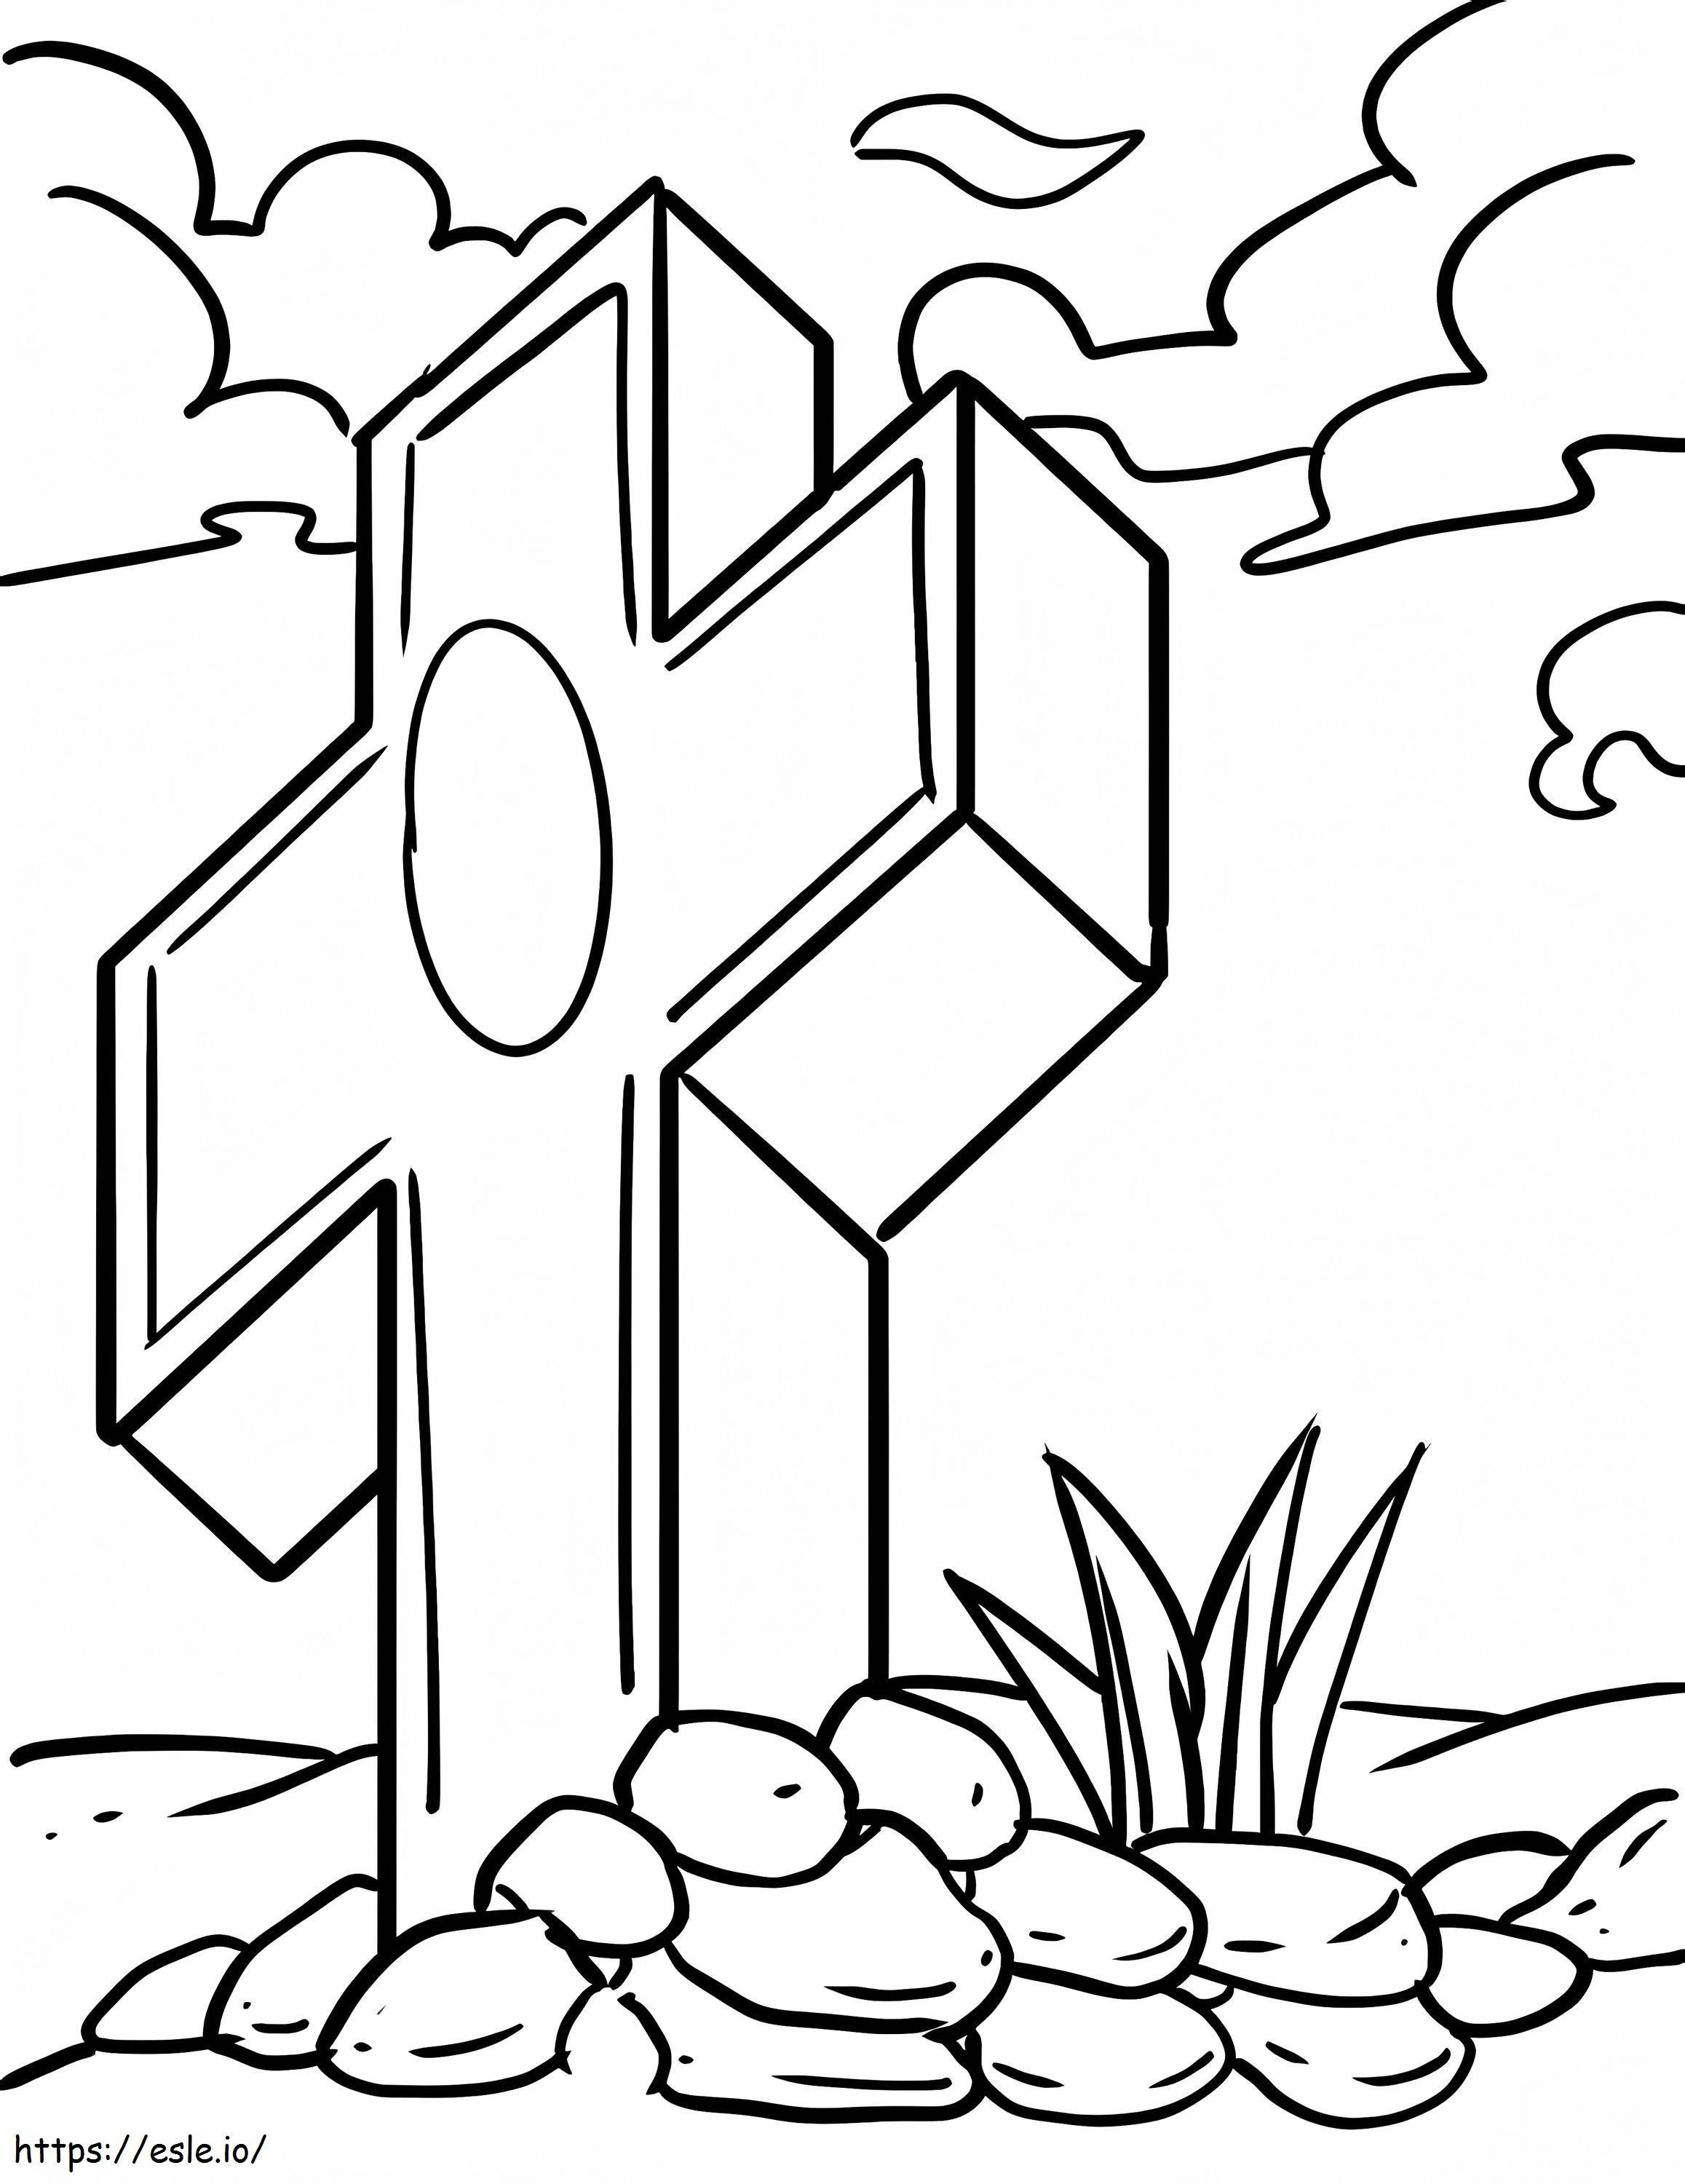 Good Friday 12 coloring page